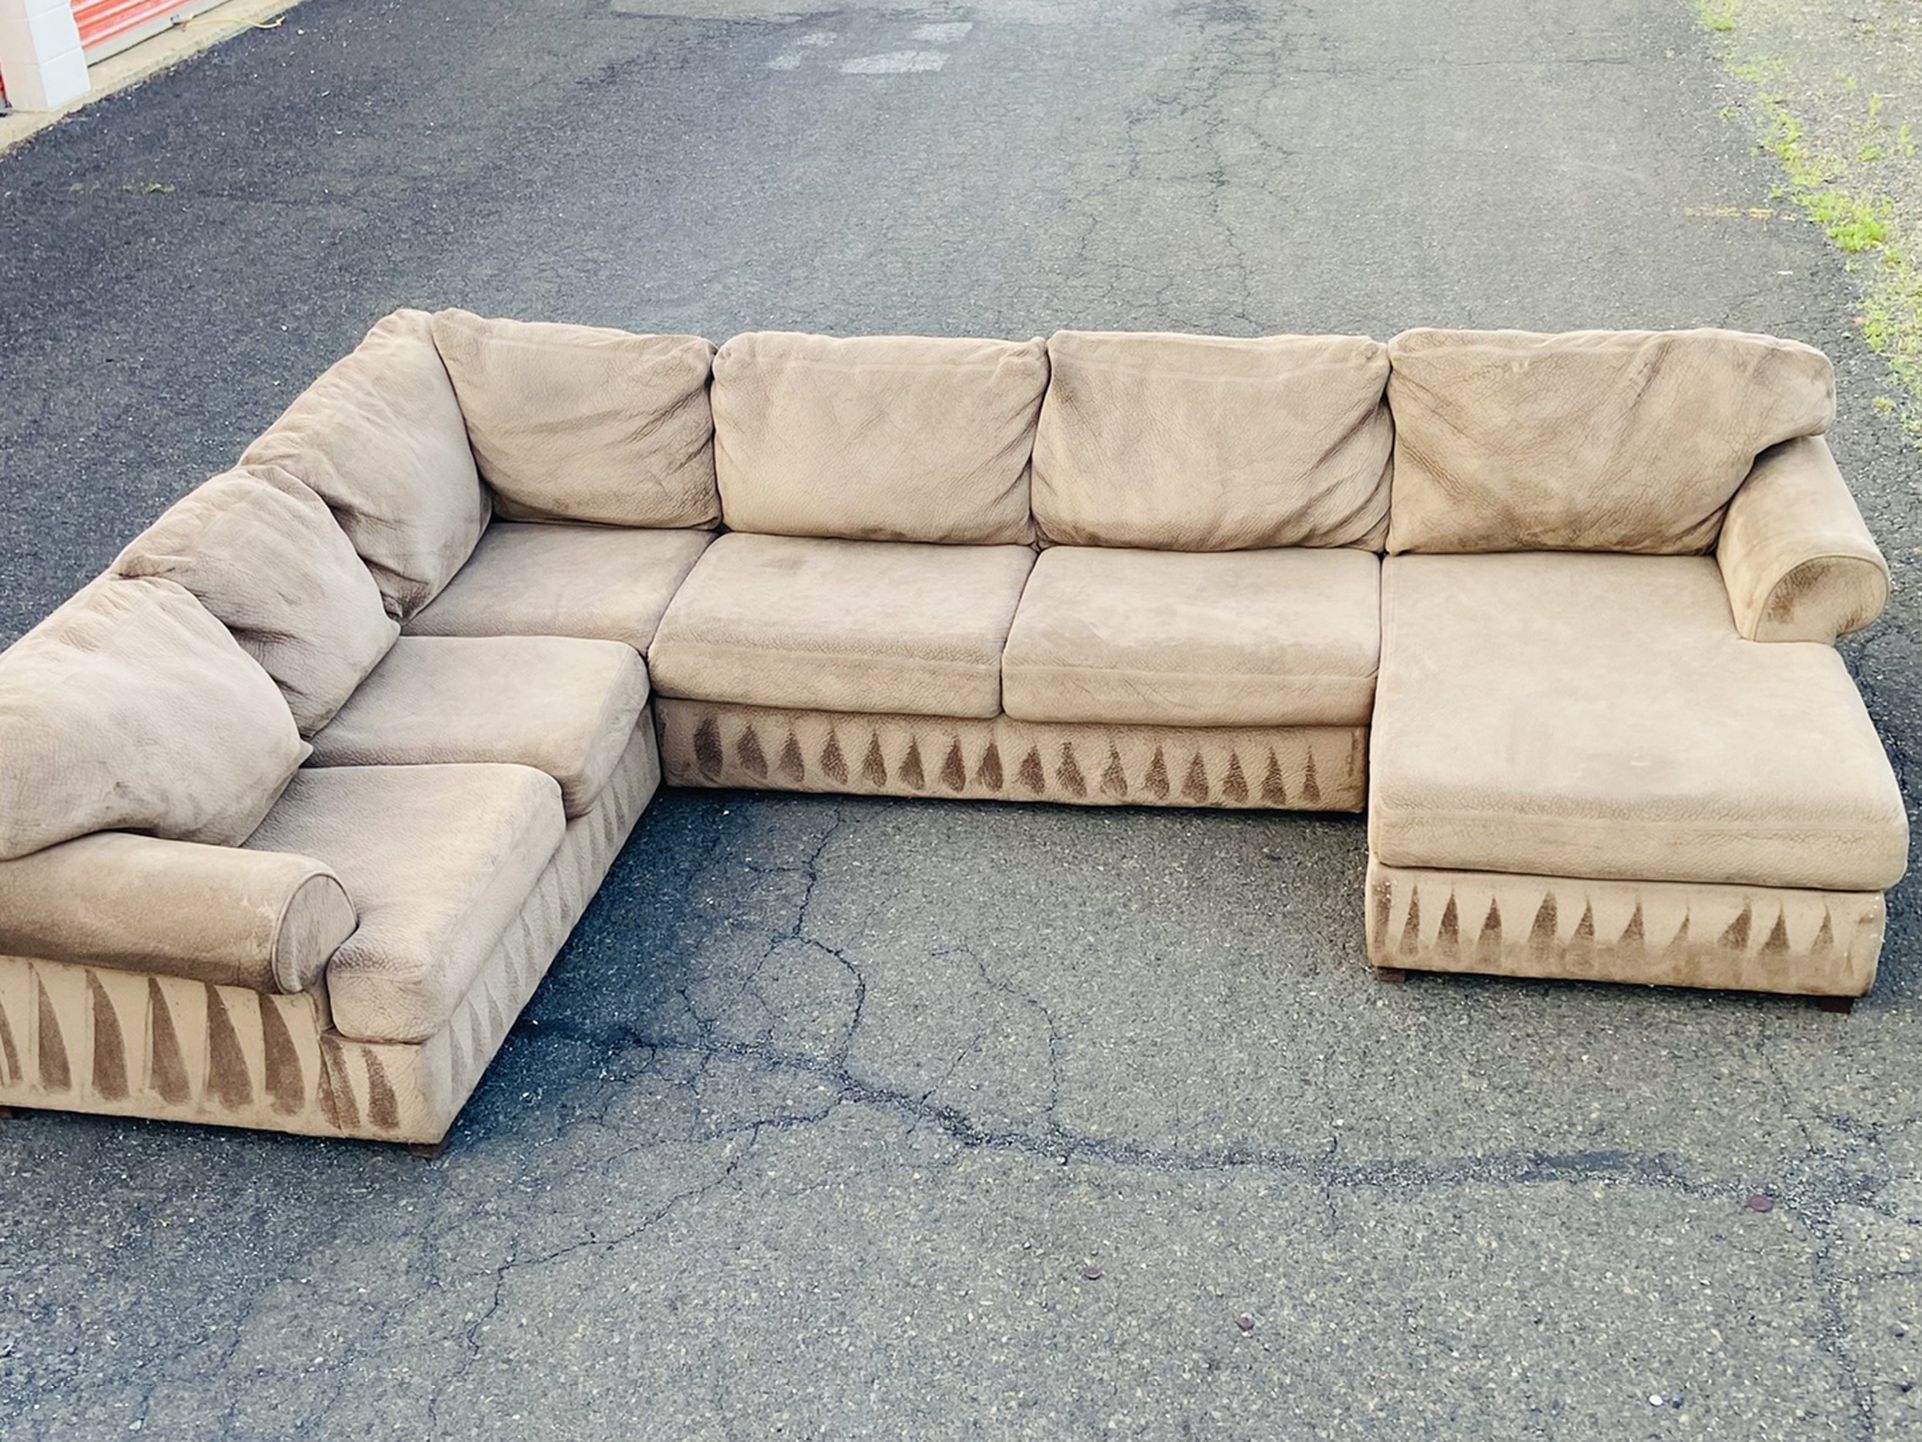 FREE DELIVERY - Comfortable Big Double Sectional Brown Couch- Look My Profile For More Options